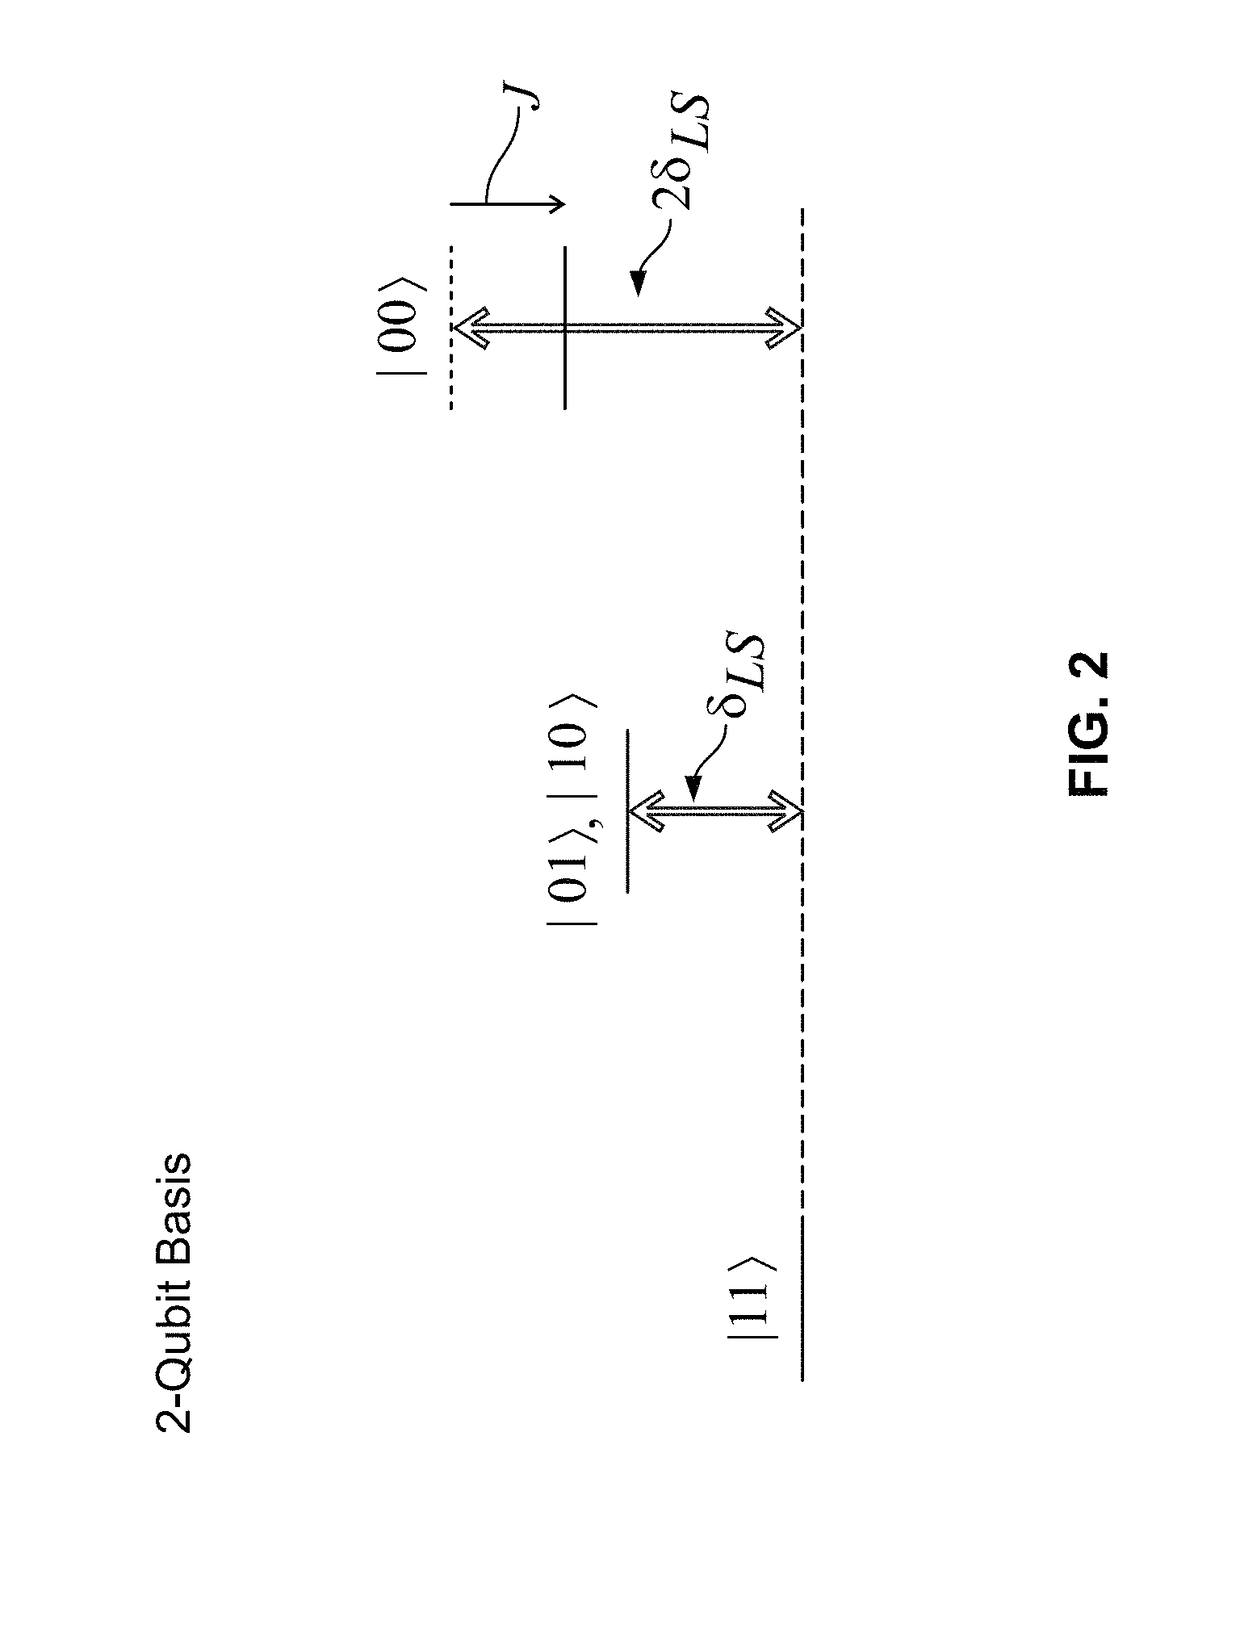 Method and apparatus for quantum information processing using entangled neutral-atom qubits